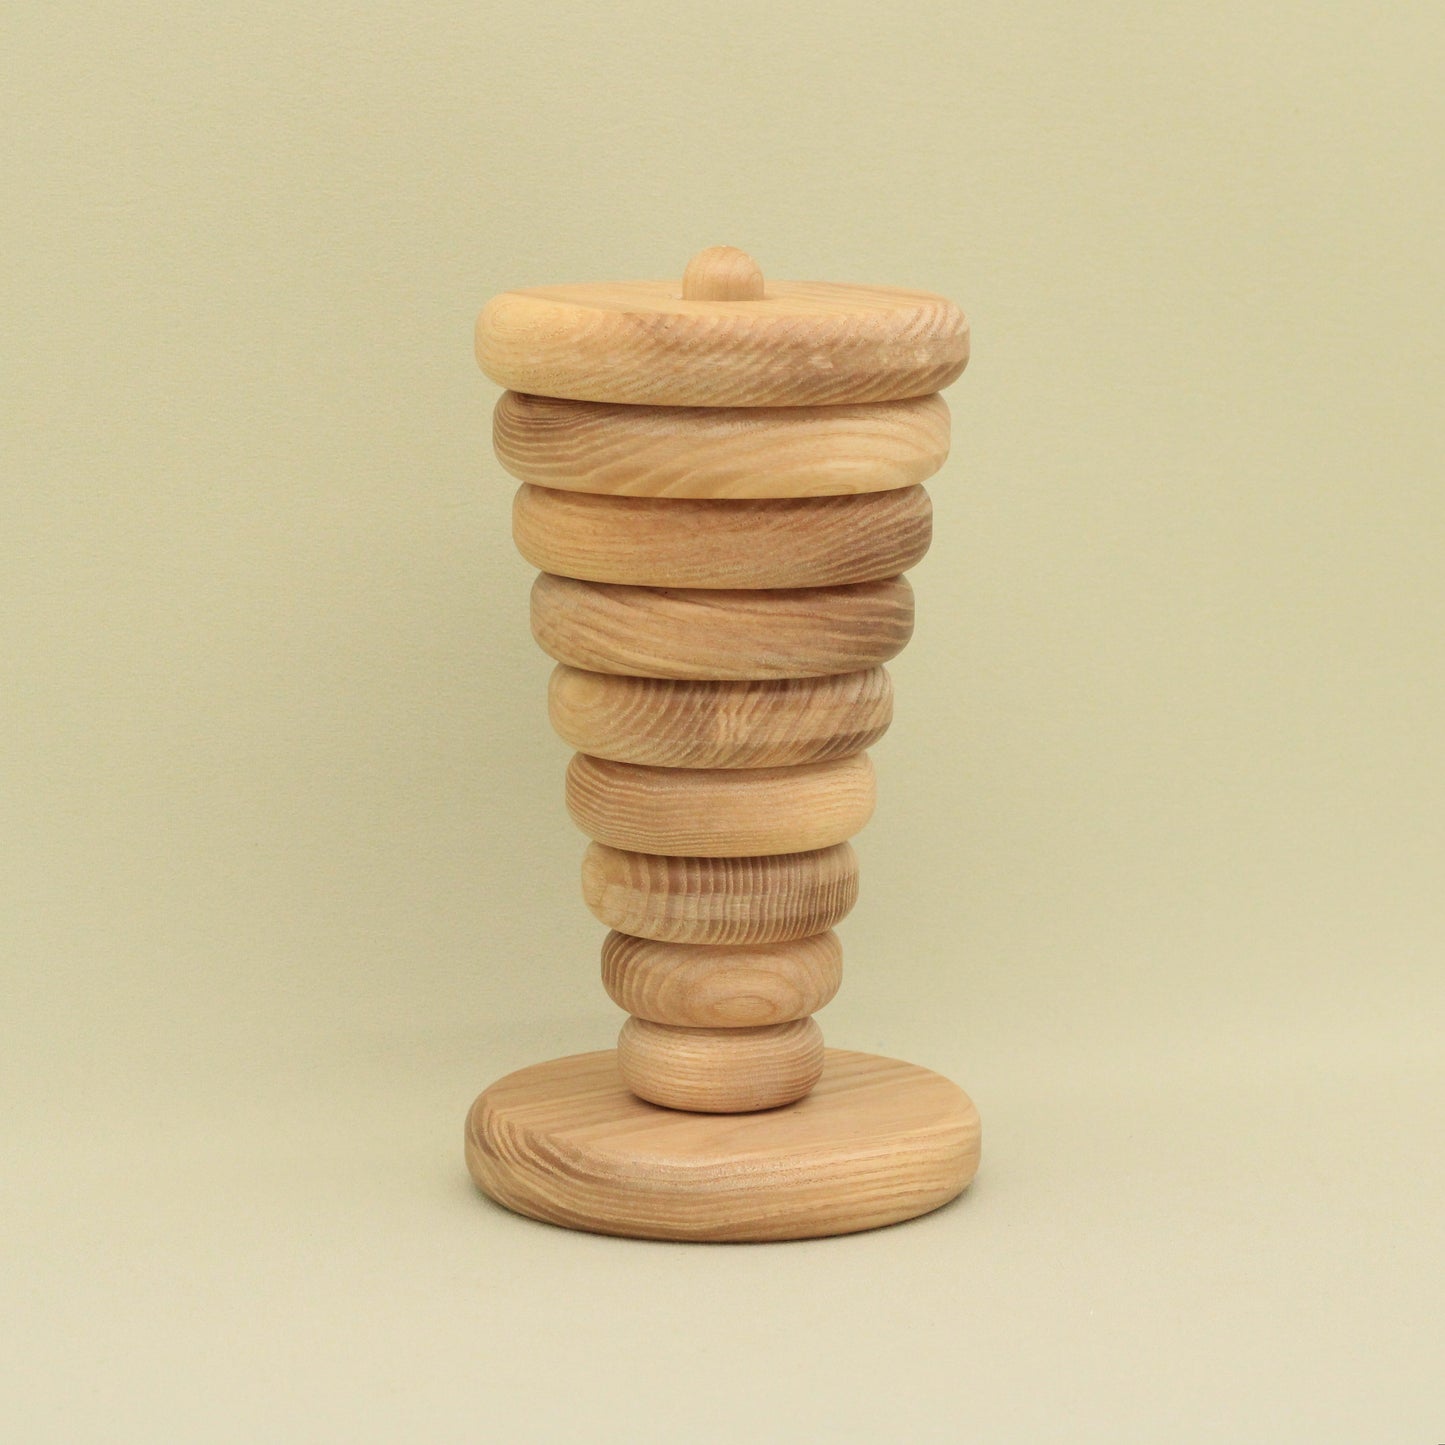 Lotes Toys Natural Rings Wooden Stacking Pyramid - 10 pieces PY02